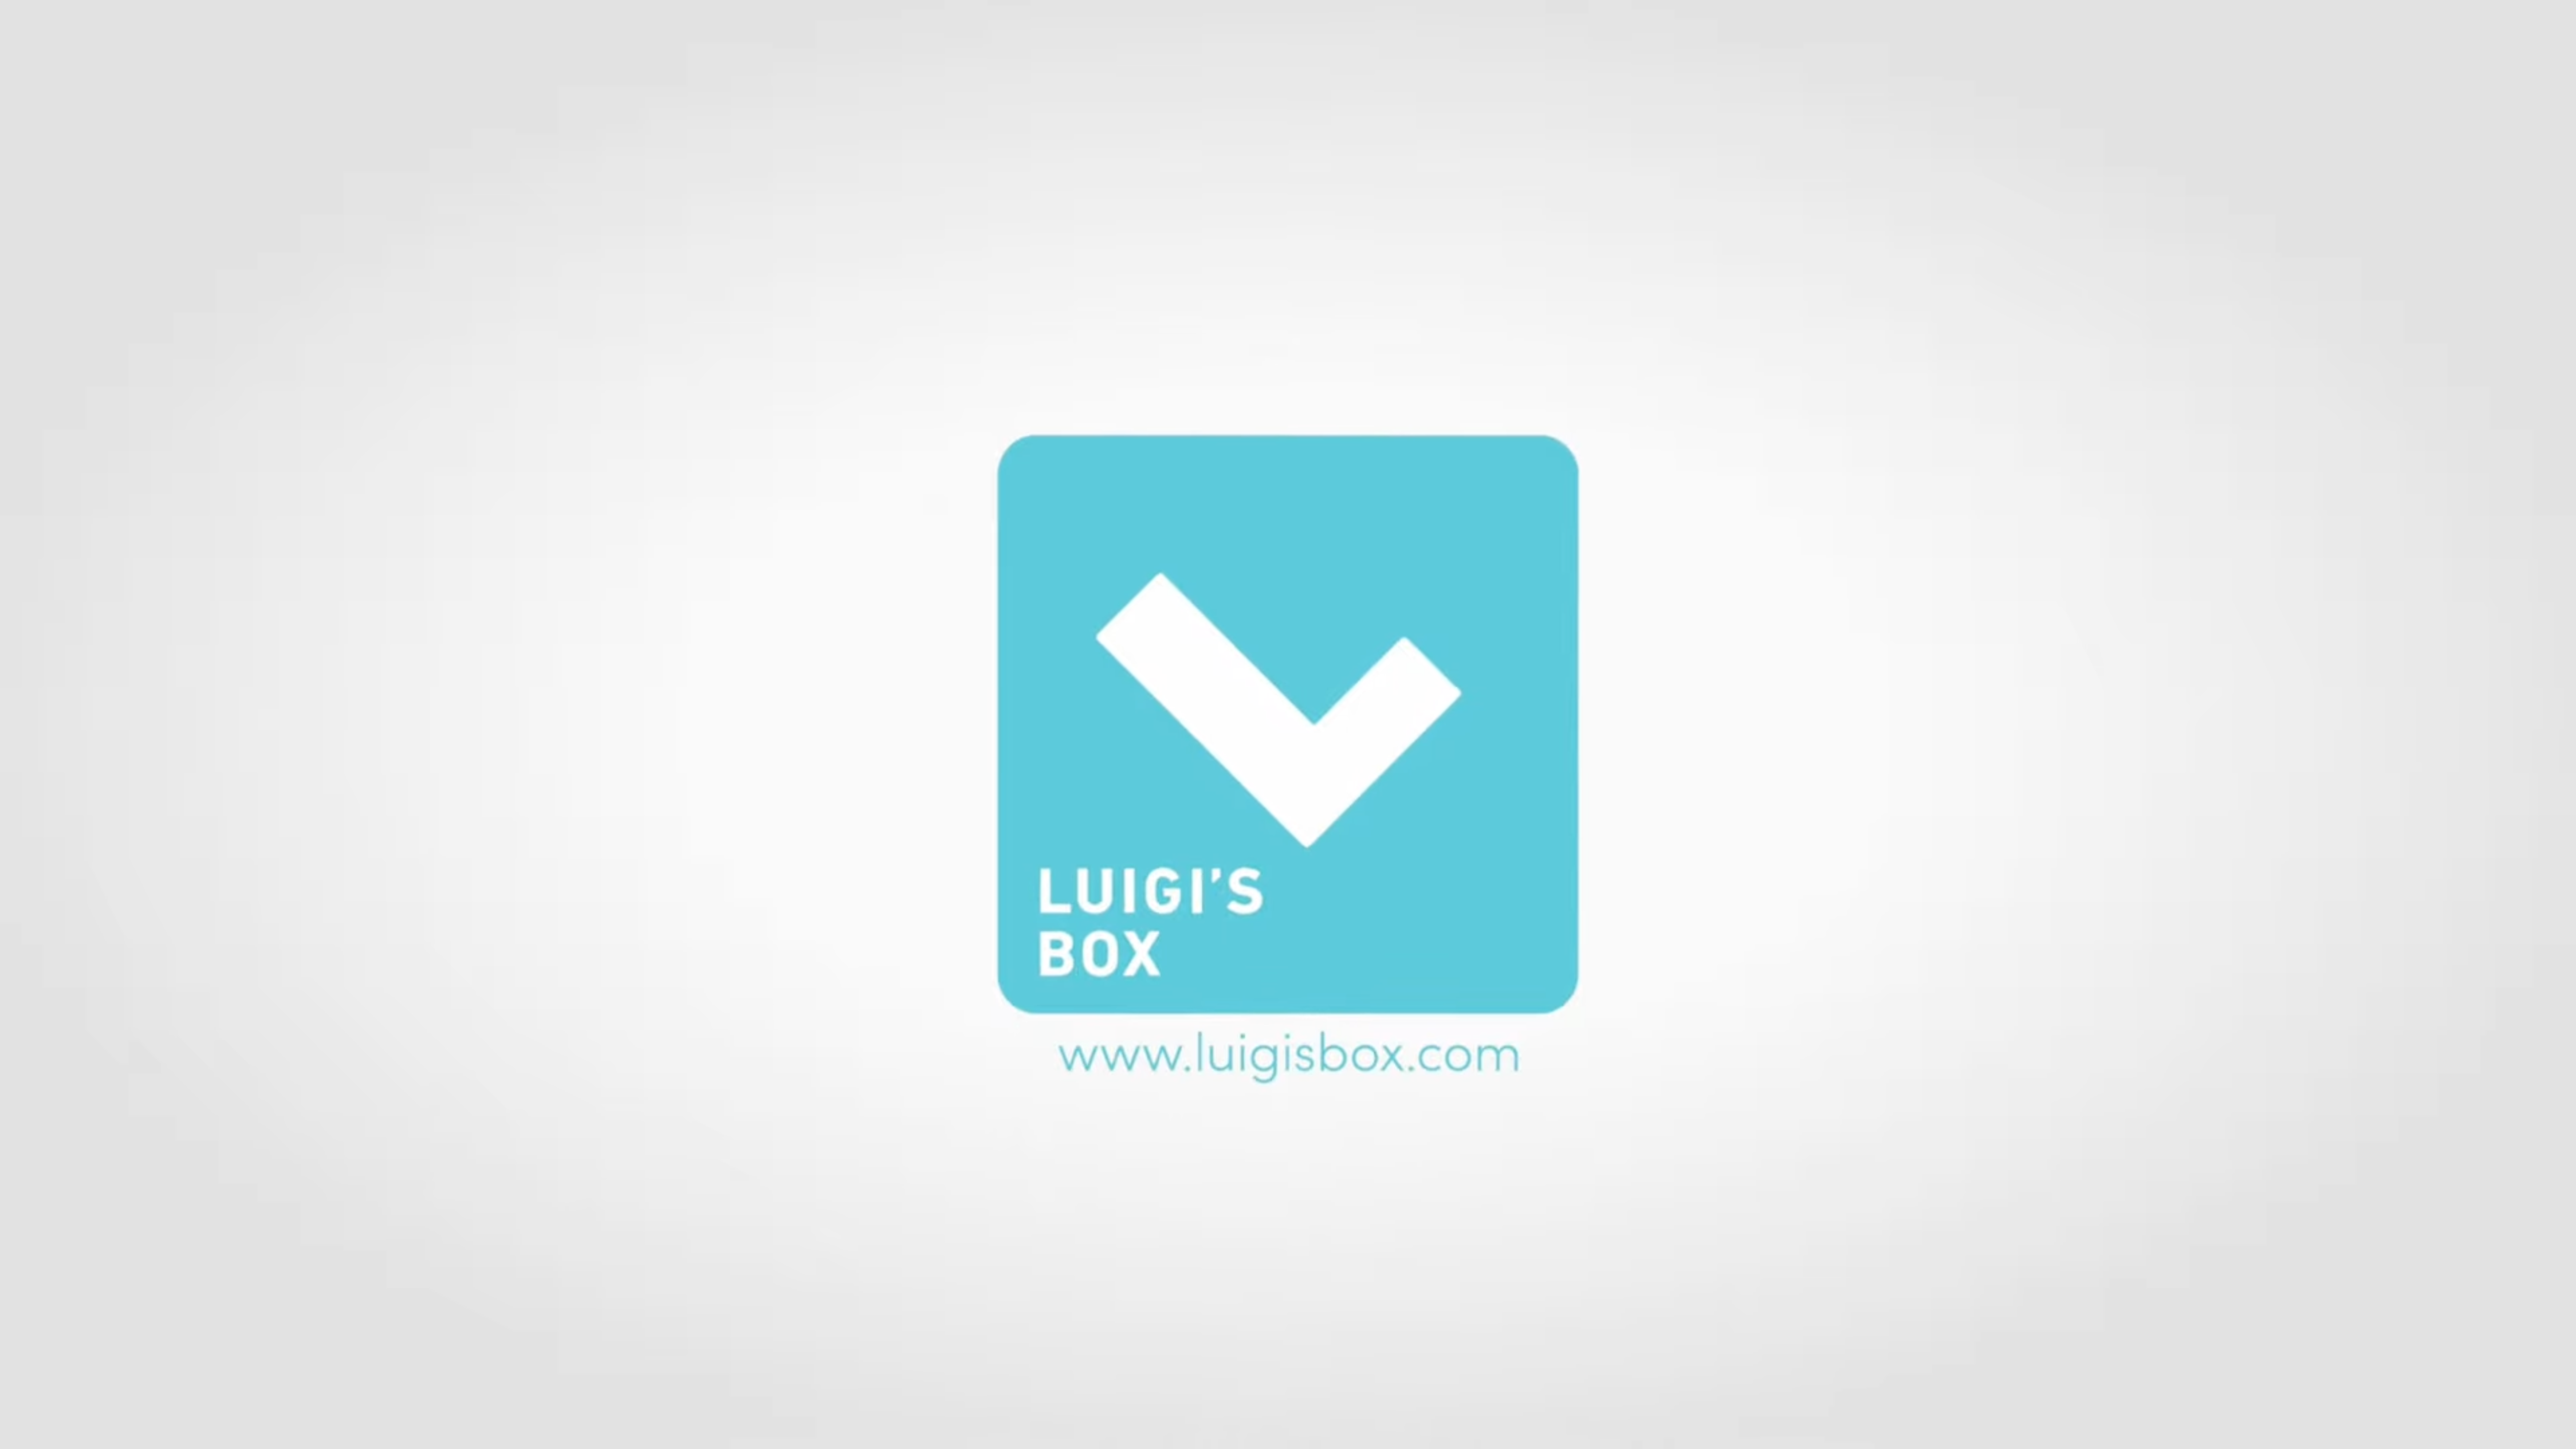 Watch video to learn more about Luigi's Box products.